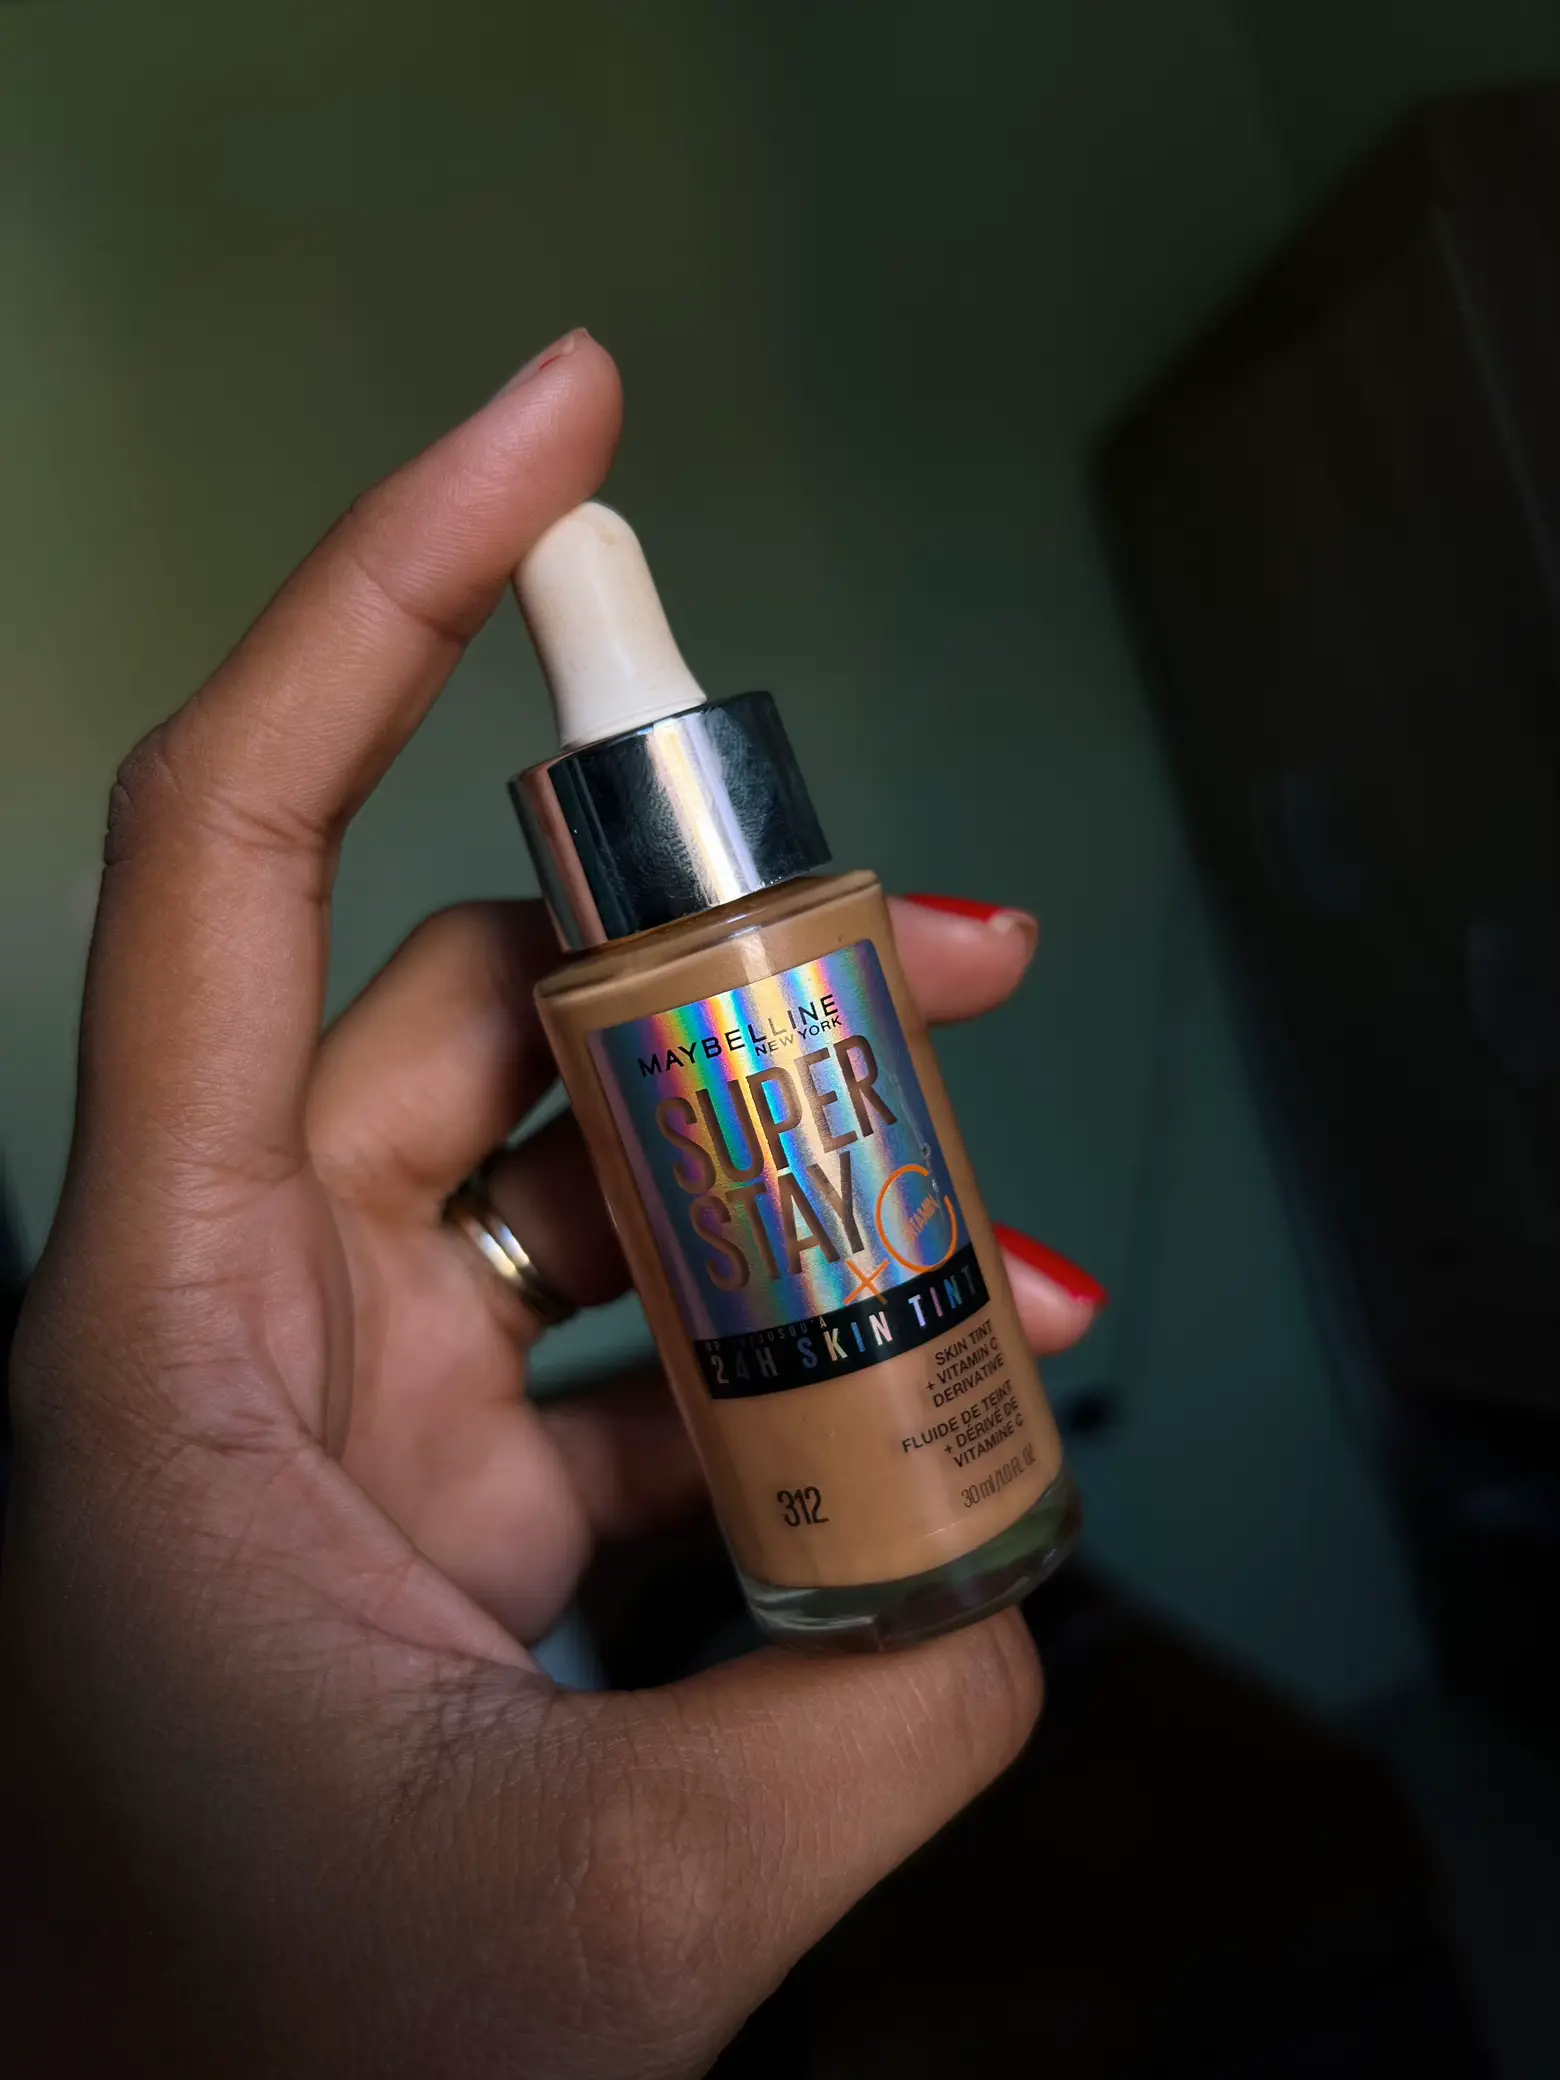 Maybelline Skin Tint review 💫, Gallery posted by Shannon Foster